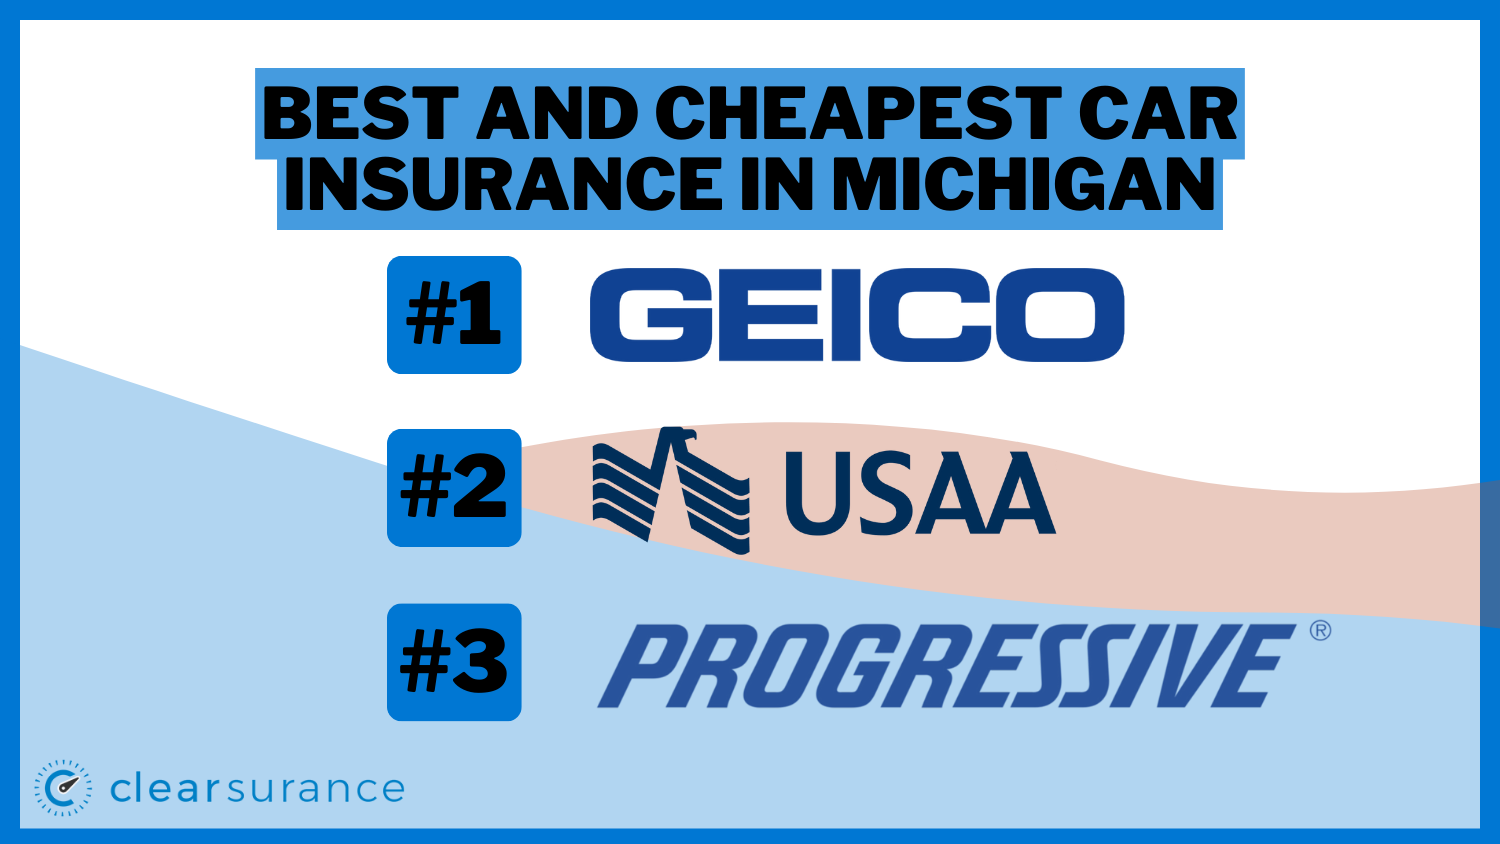 Best and Cheapest Car Insurance in Michigan: Geico, USAA, Progressive